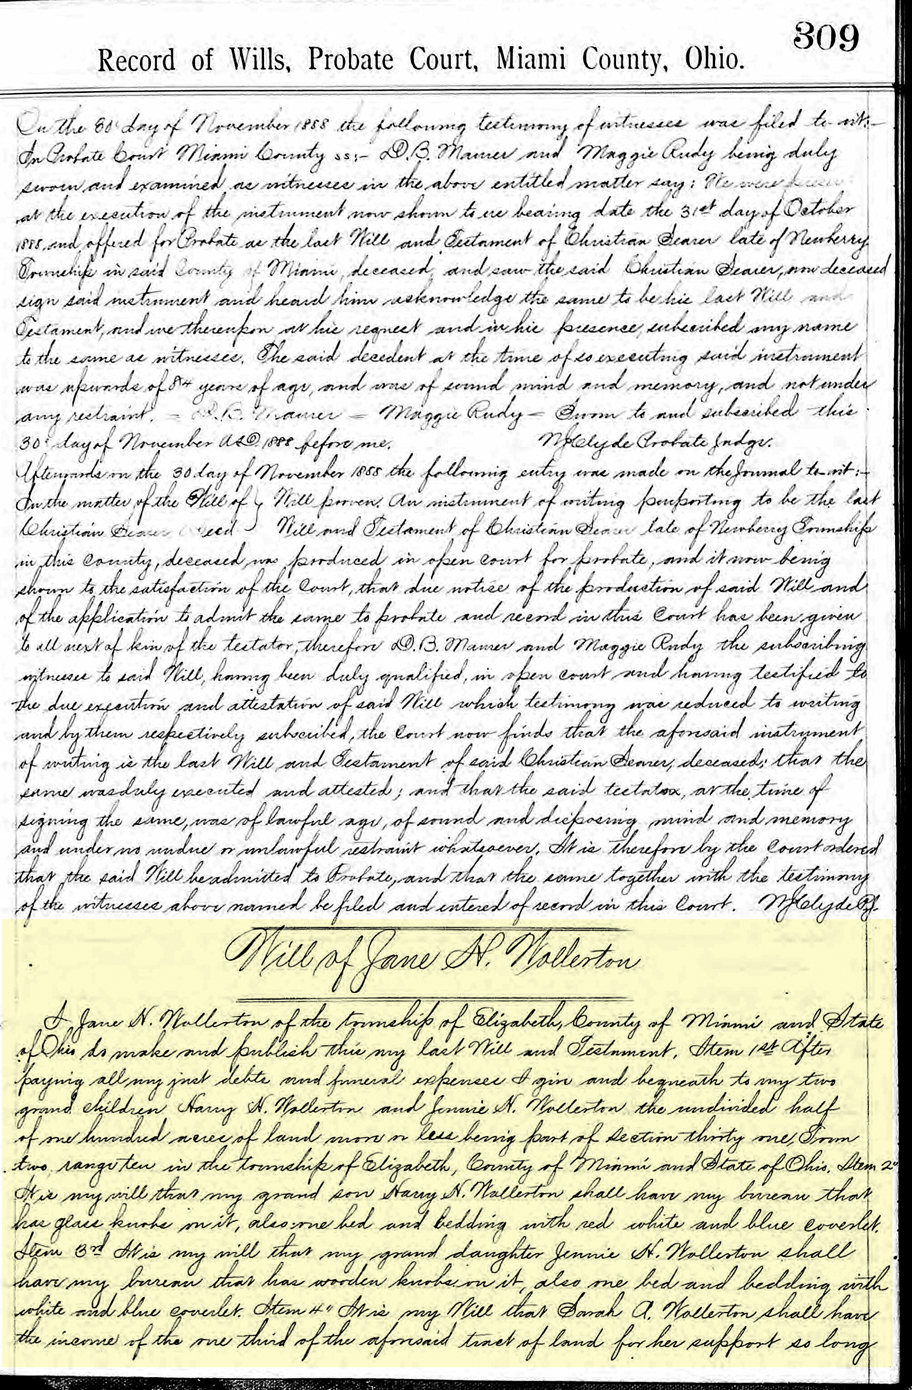 The Will of Jane (Ramsey) Wollerton dated November 14, 1881